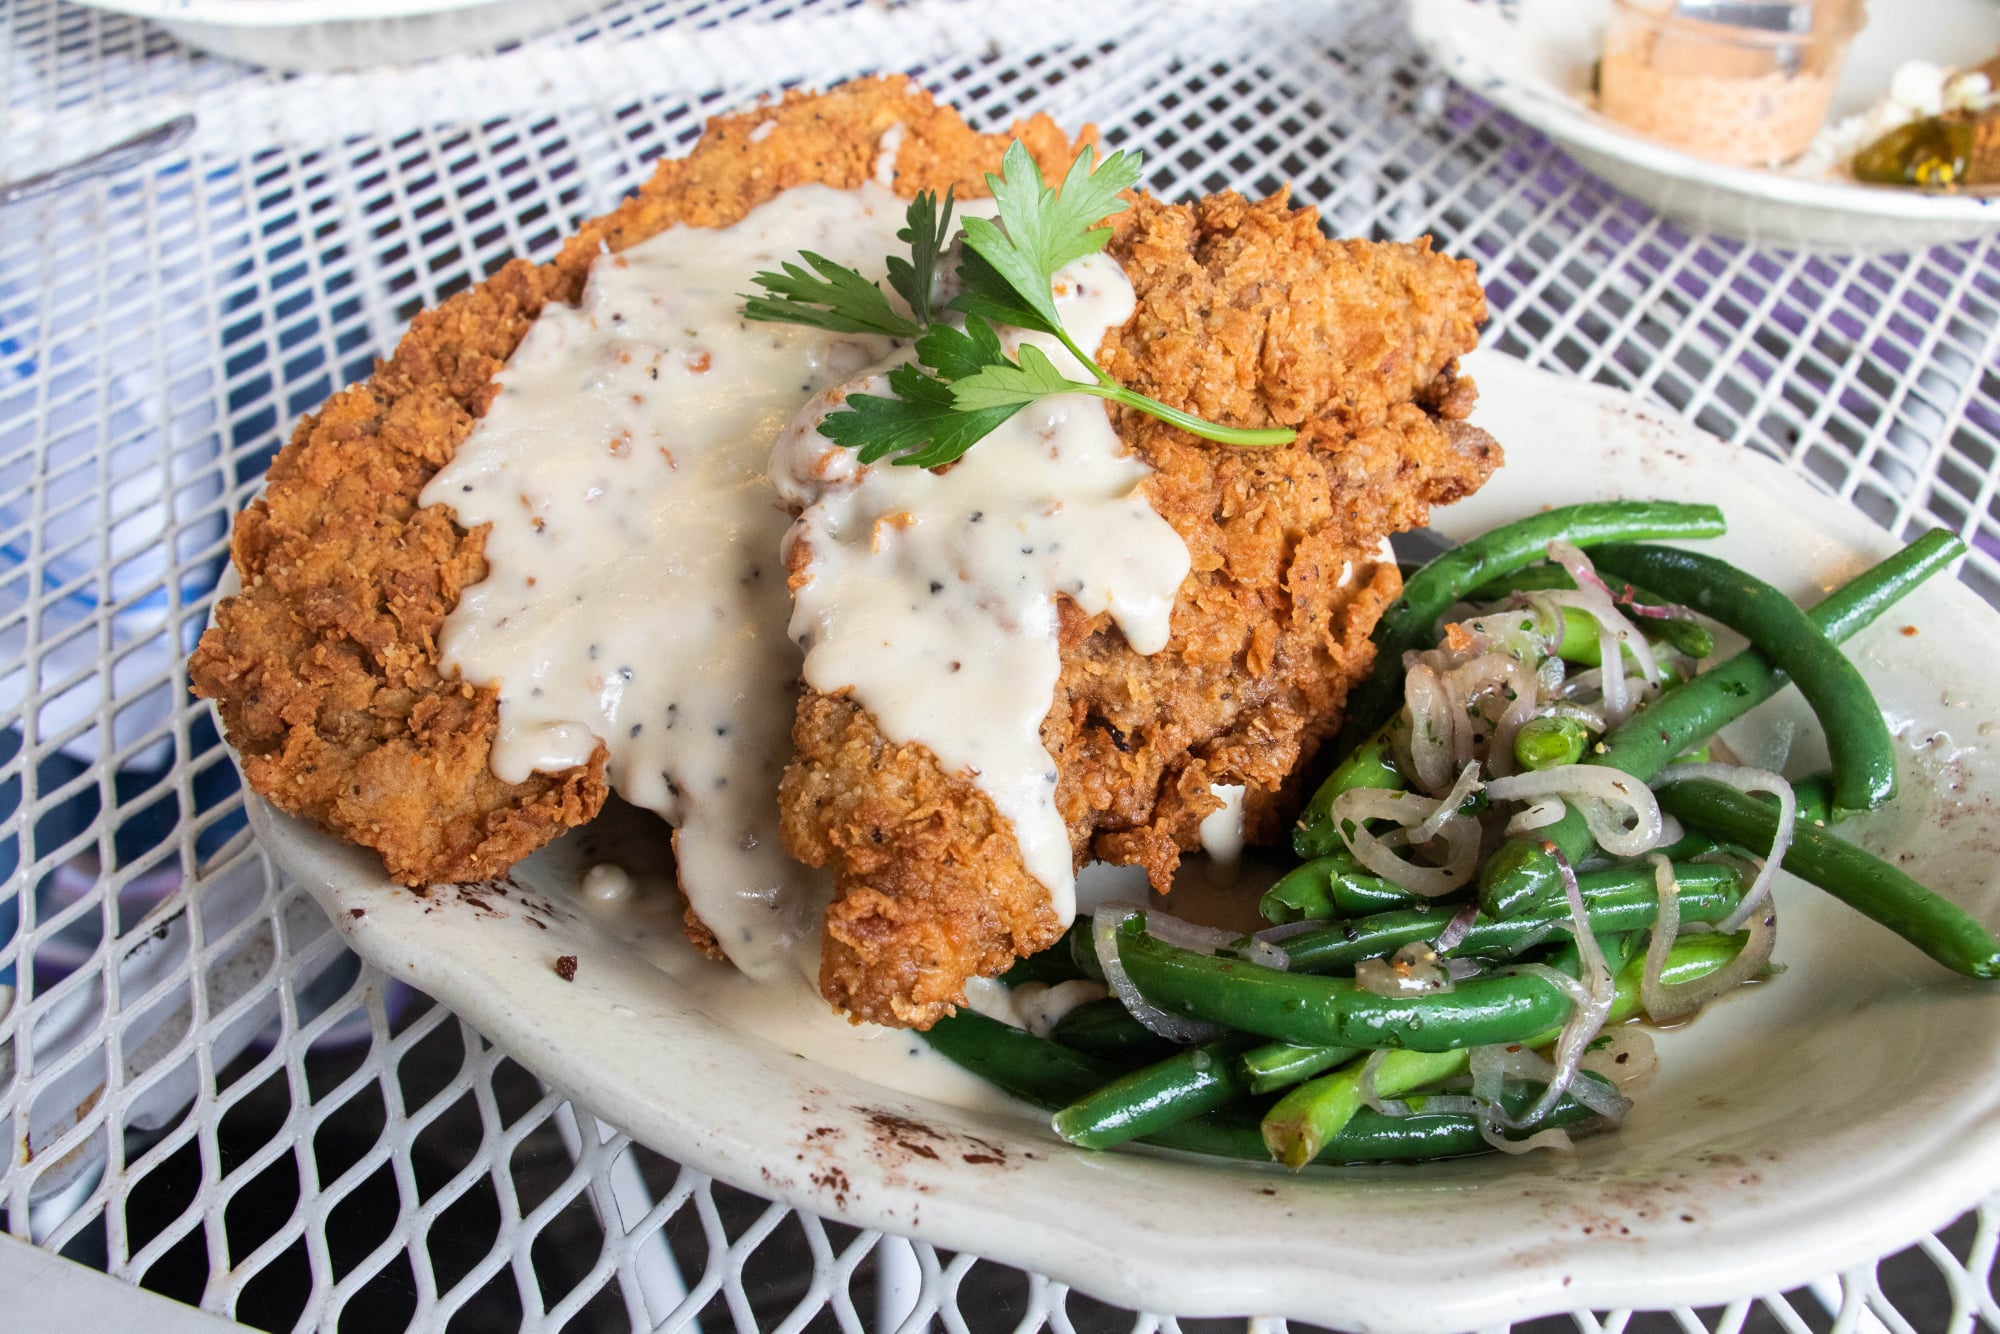 a plate of chicken fried steak topped with white gravy and a side of greens